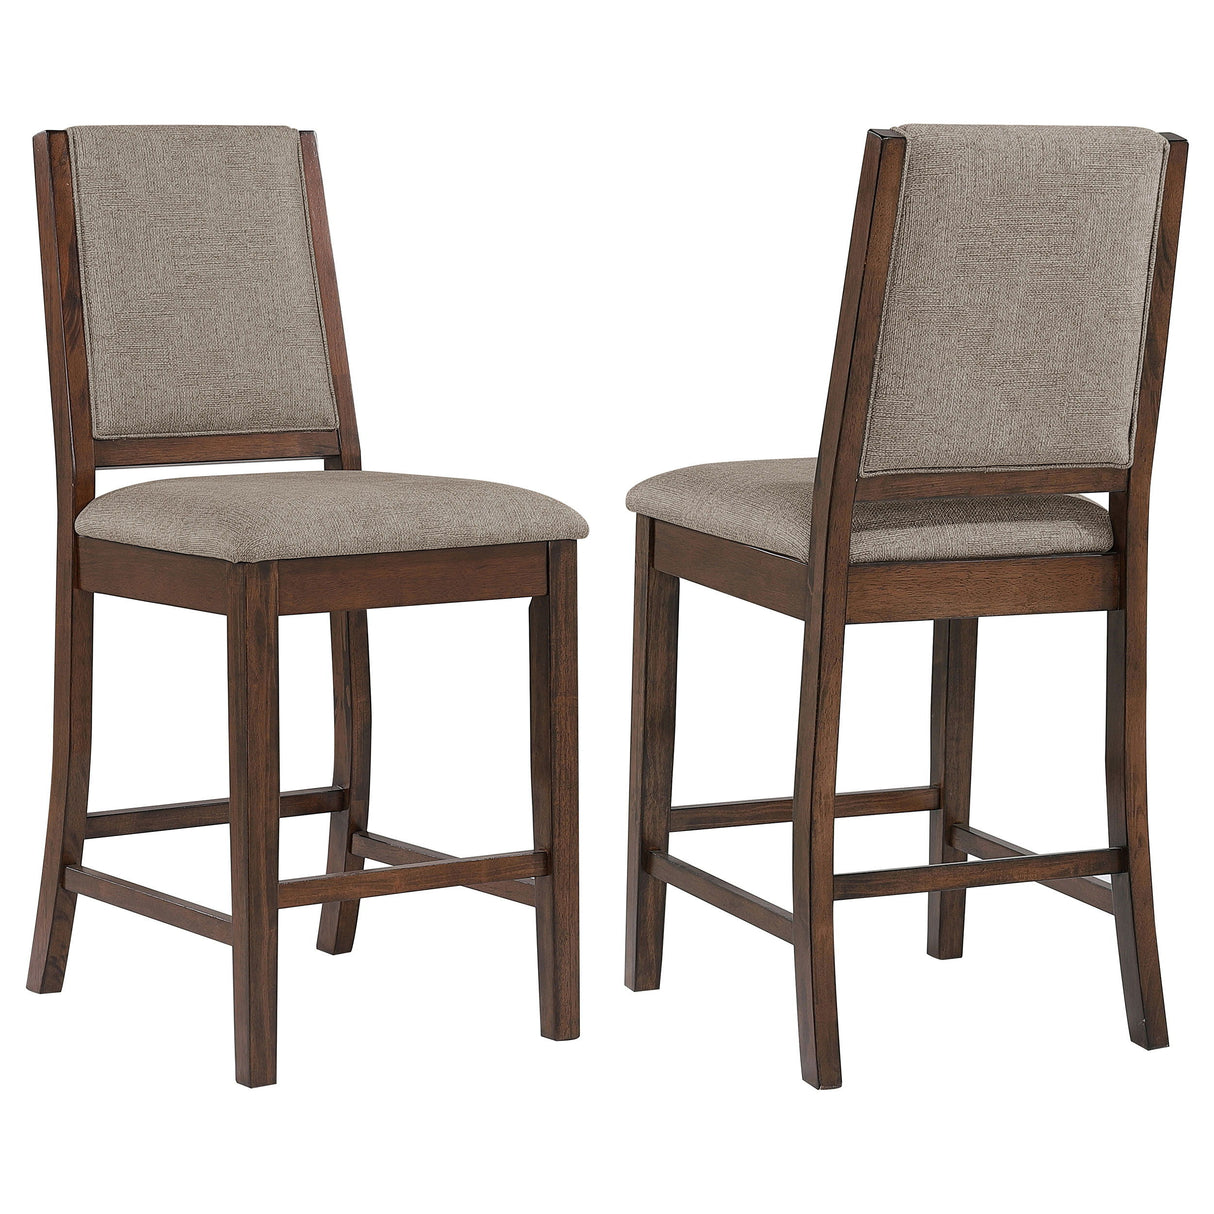 Patterson - Upholstered Counter Chair (Set of 2) - Mango Oak